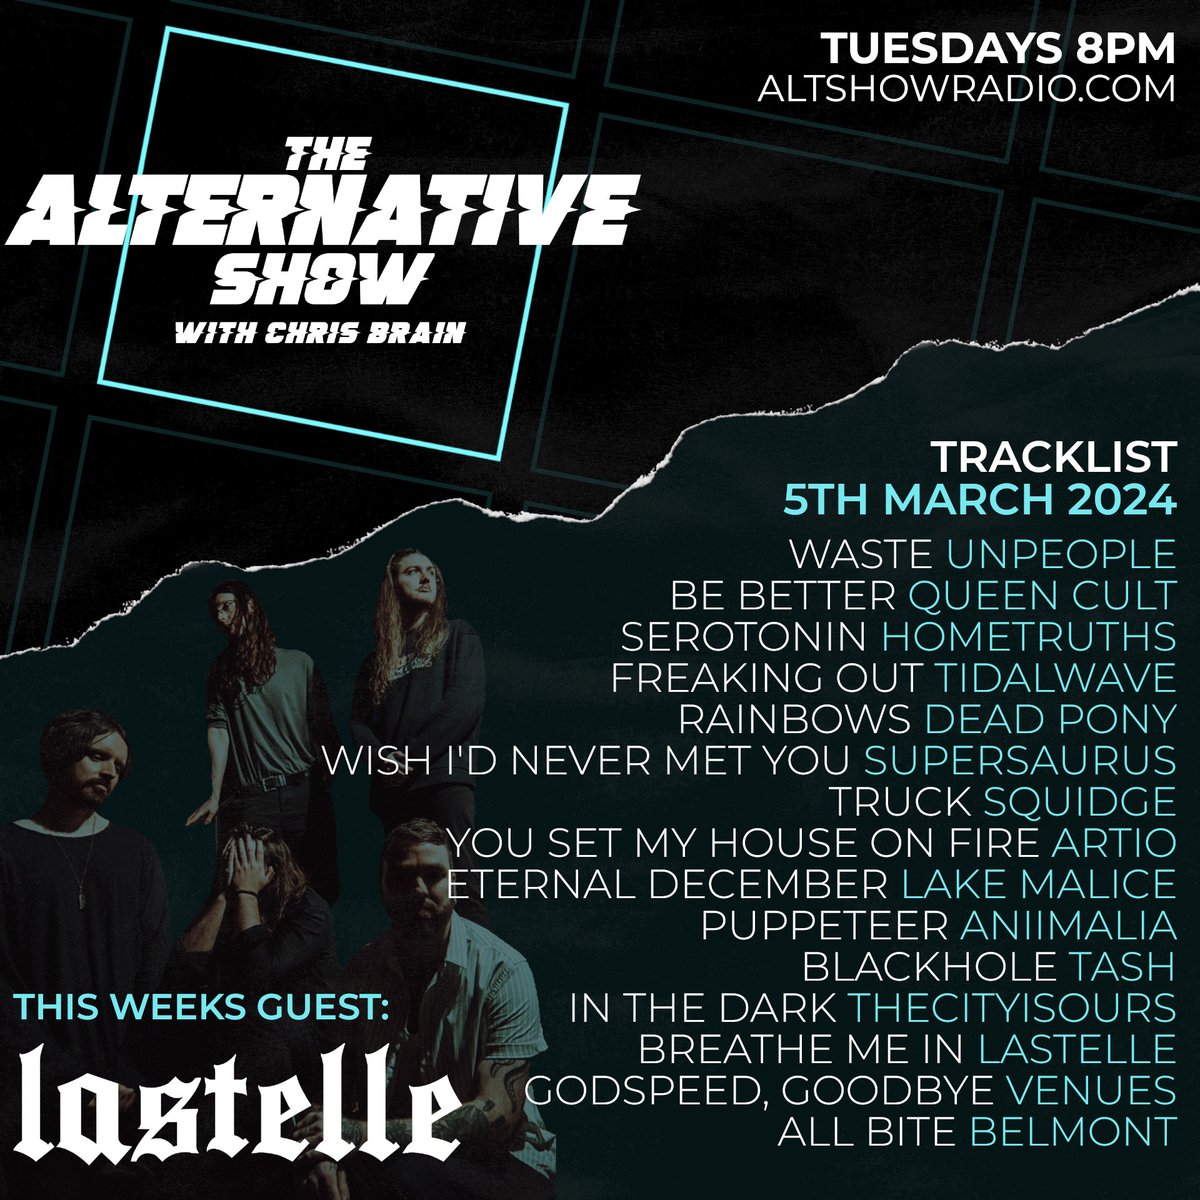 💥STREAMING NOW 👉 bit.ly/43ckb2N 💥 My guests this week are @lastelleband plus 🔥HOTTEST TRACK 🔥 from @lakemalice plus music from @weareunpeople @DeadPonyBand @superxsaurus @Artiomusic @THECITYISOURSUK and loads more! #alternative #emo #radio #posthardcore #metal